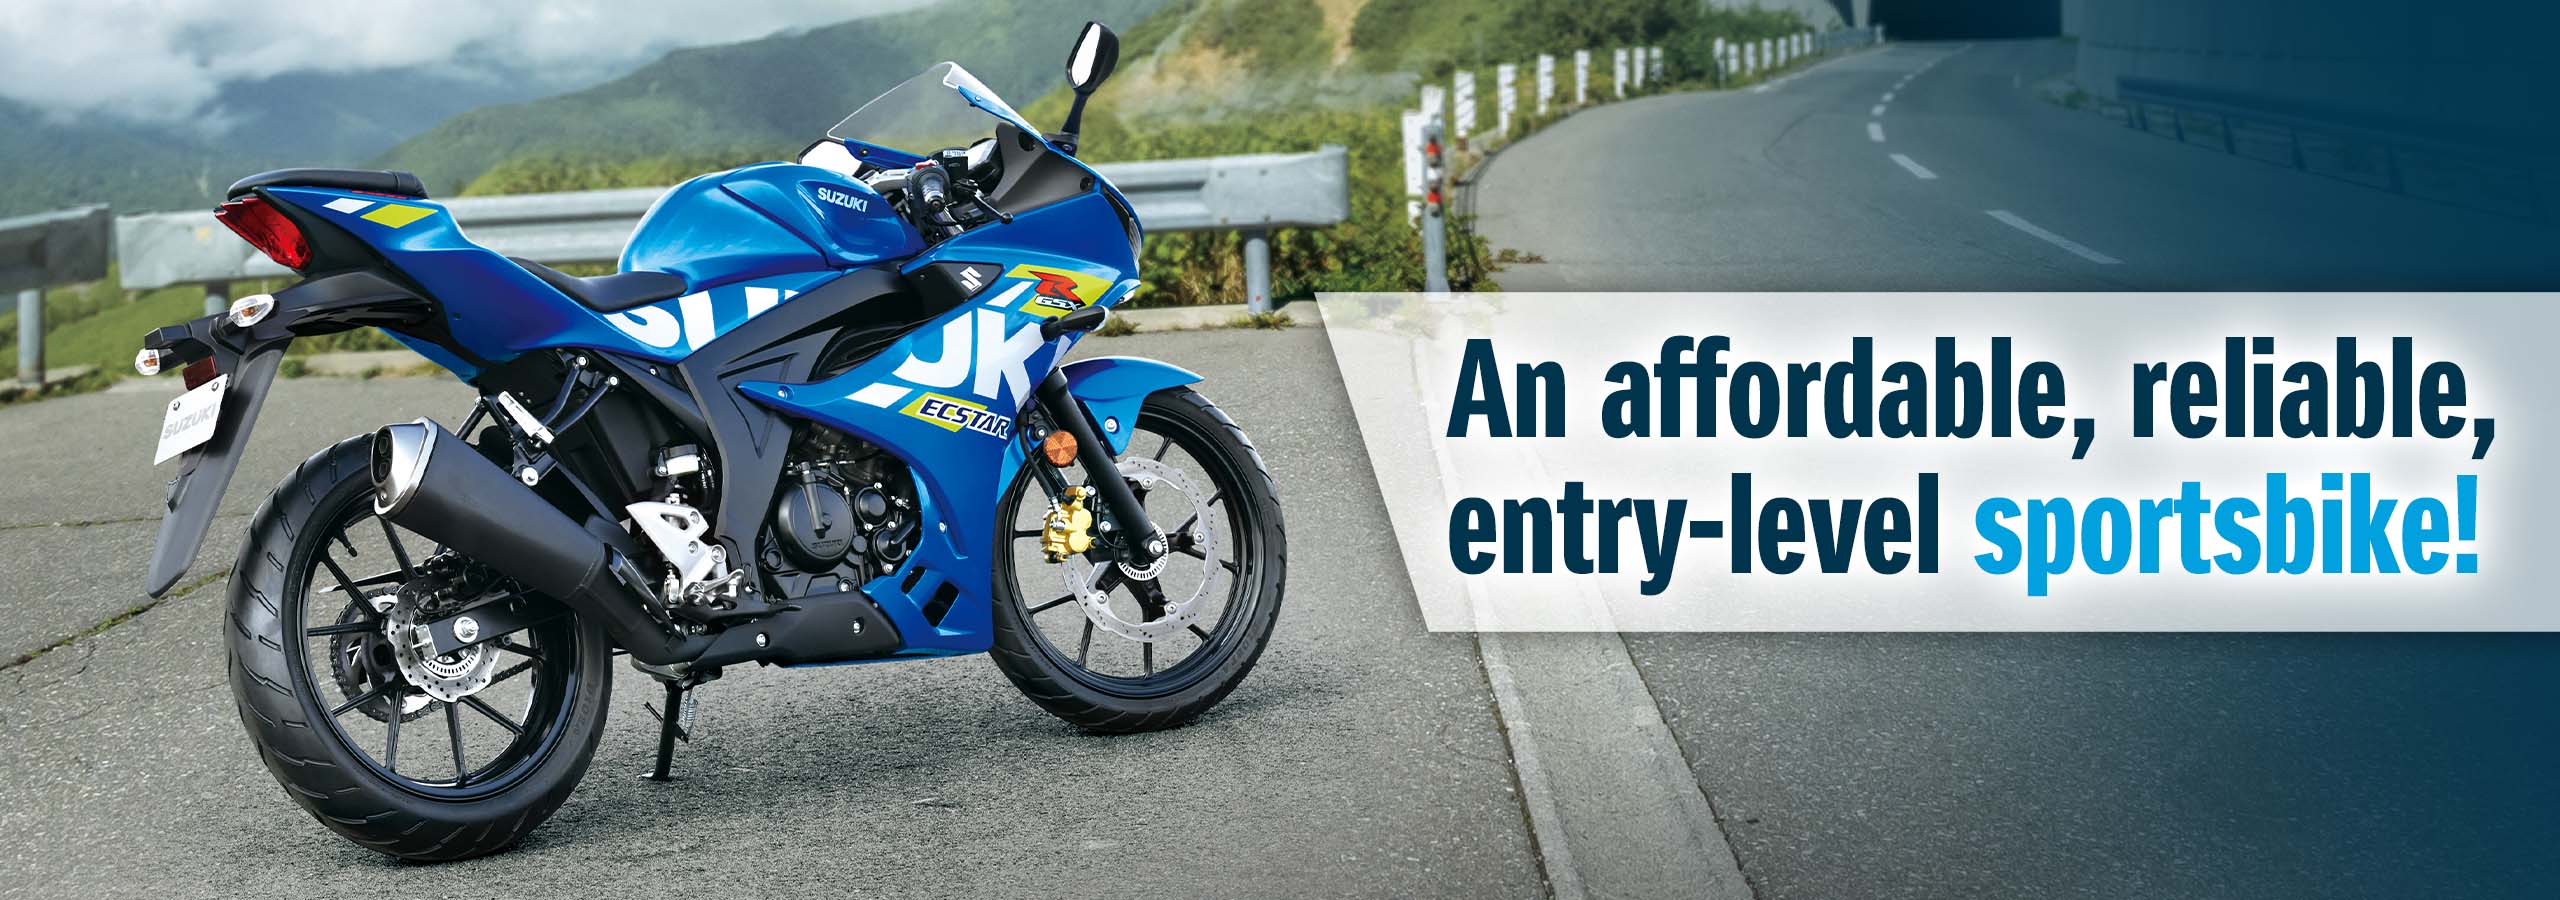 The affordable and reliable Suzuki GSX-R125 is now available at Laguna Motorcycles Maidstone